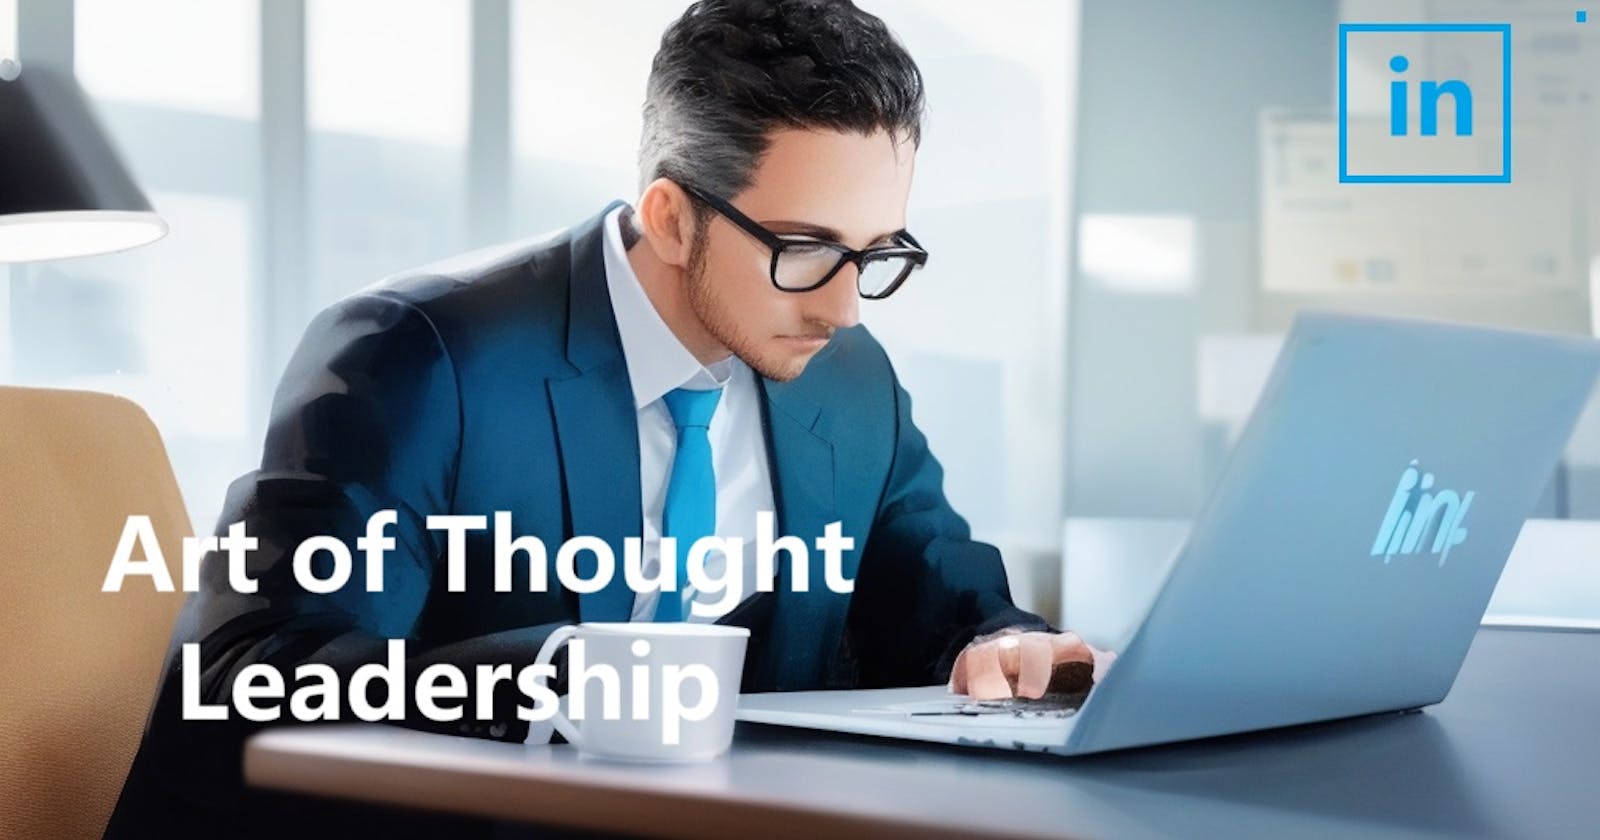 The Art of Thought Leadership on LinkedIn: Engaging Professional Audiences